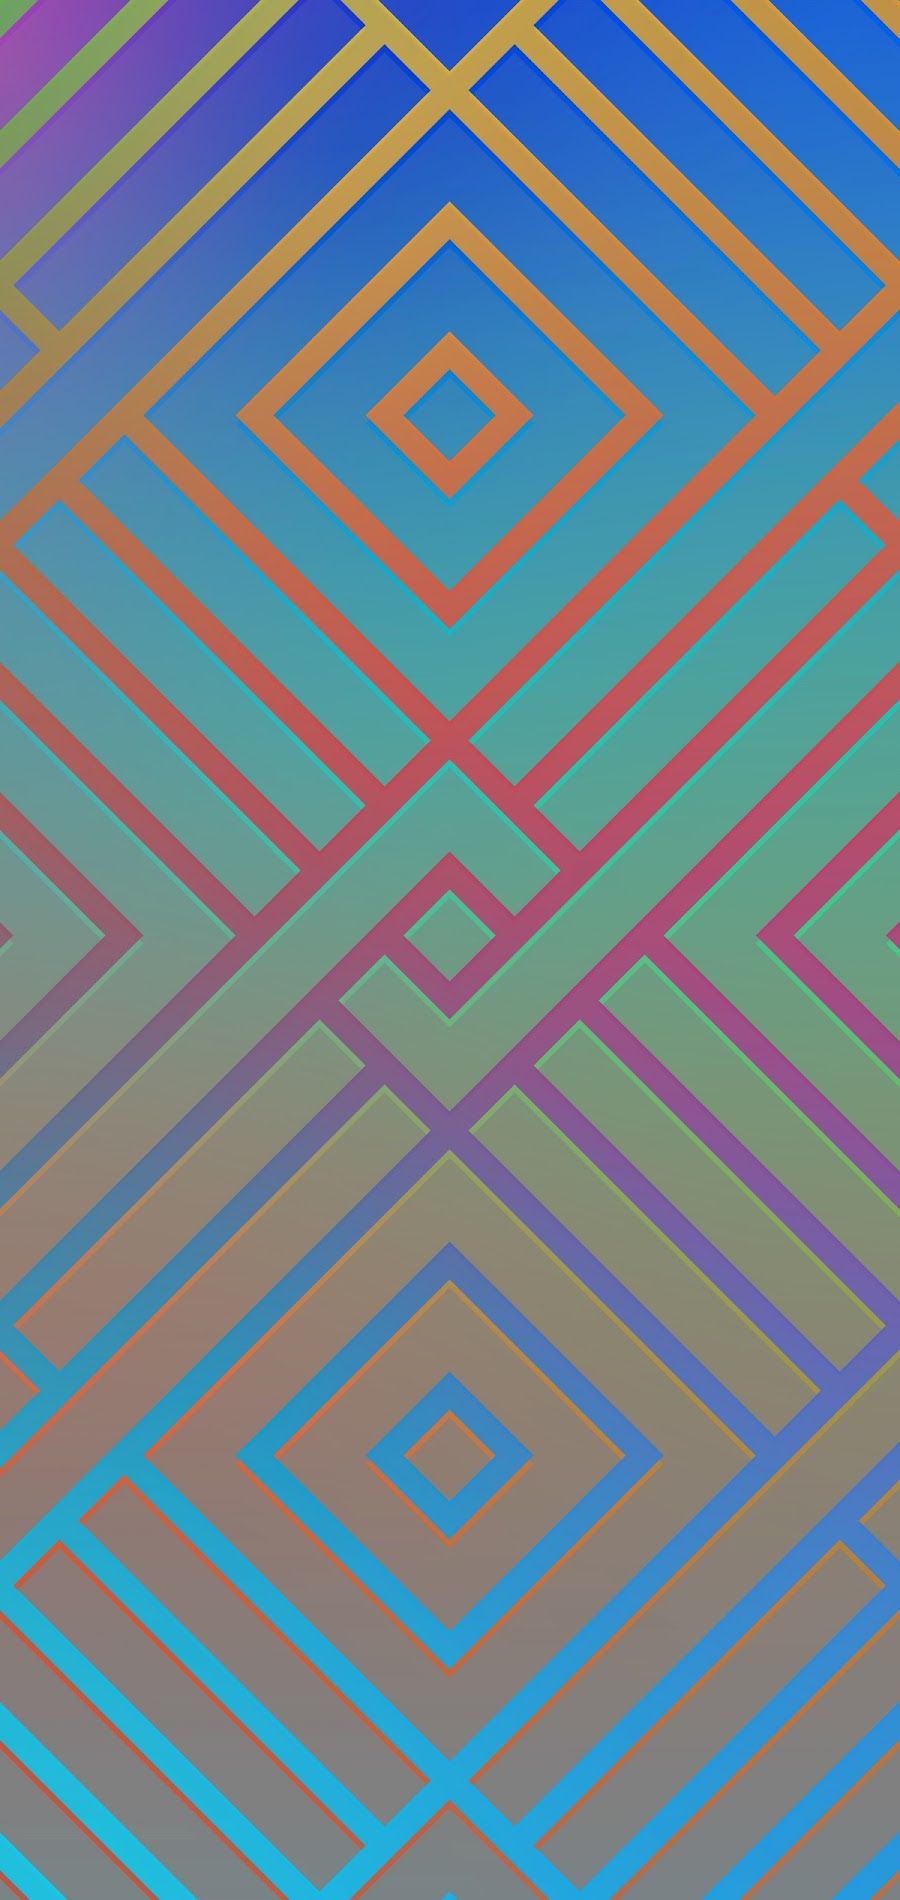 An abstract image of lines and squares in blue, green, purple, and orange. - Geometry